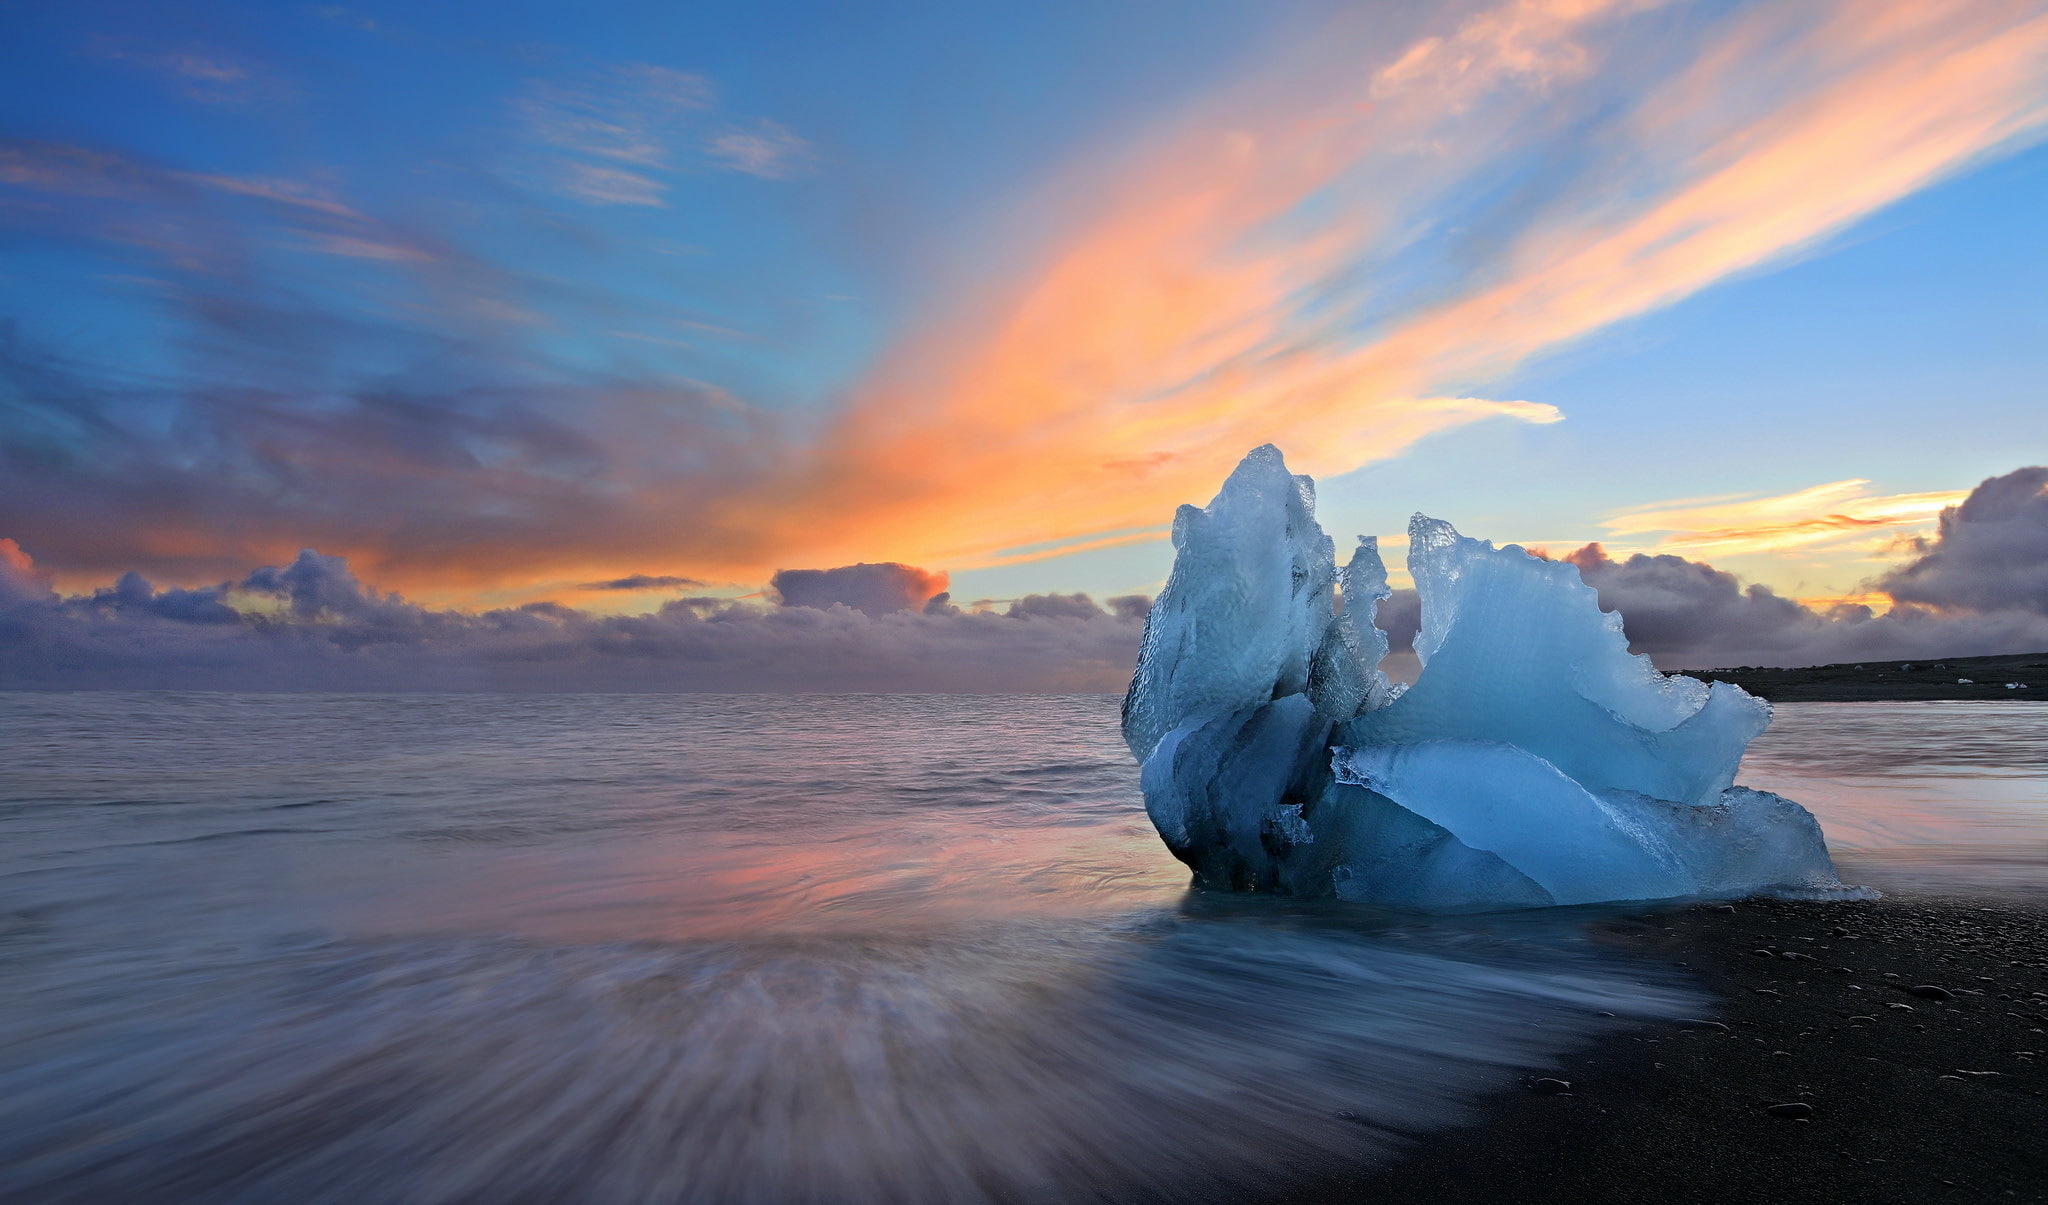 ice, sky, nature, sunset, sea, water, cloud - sky, beauty in nature